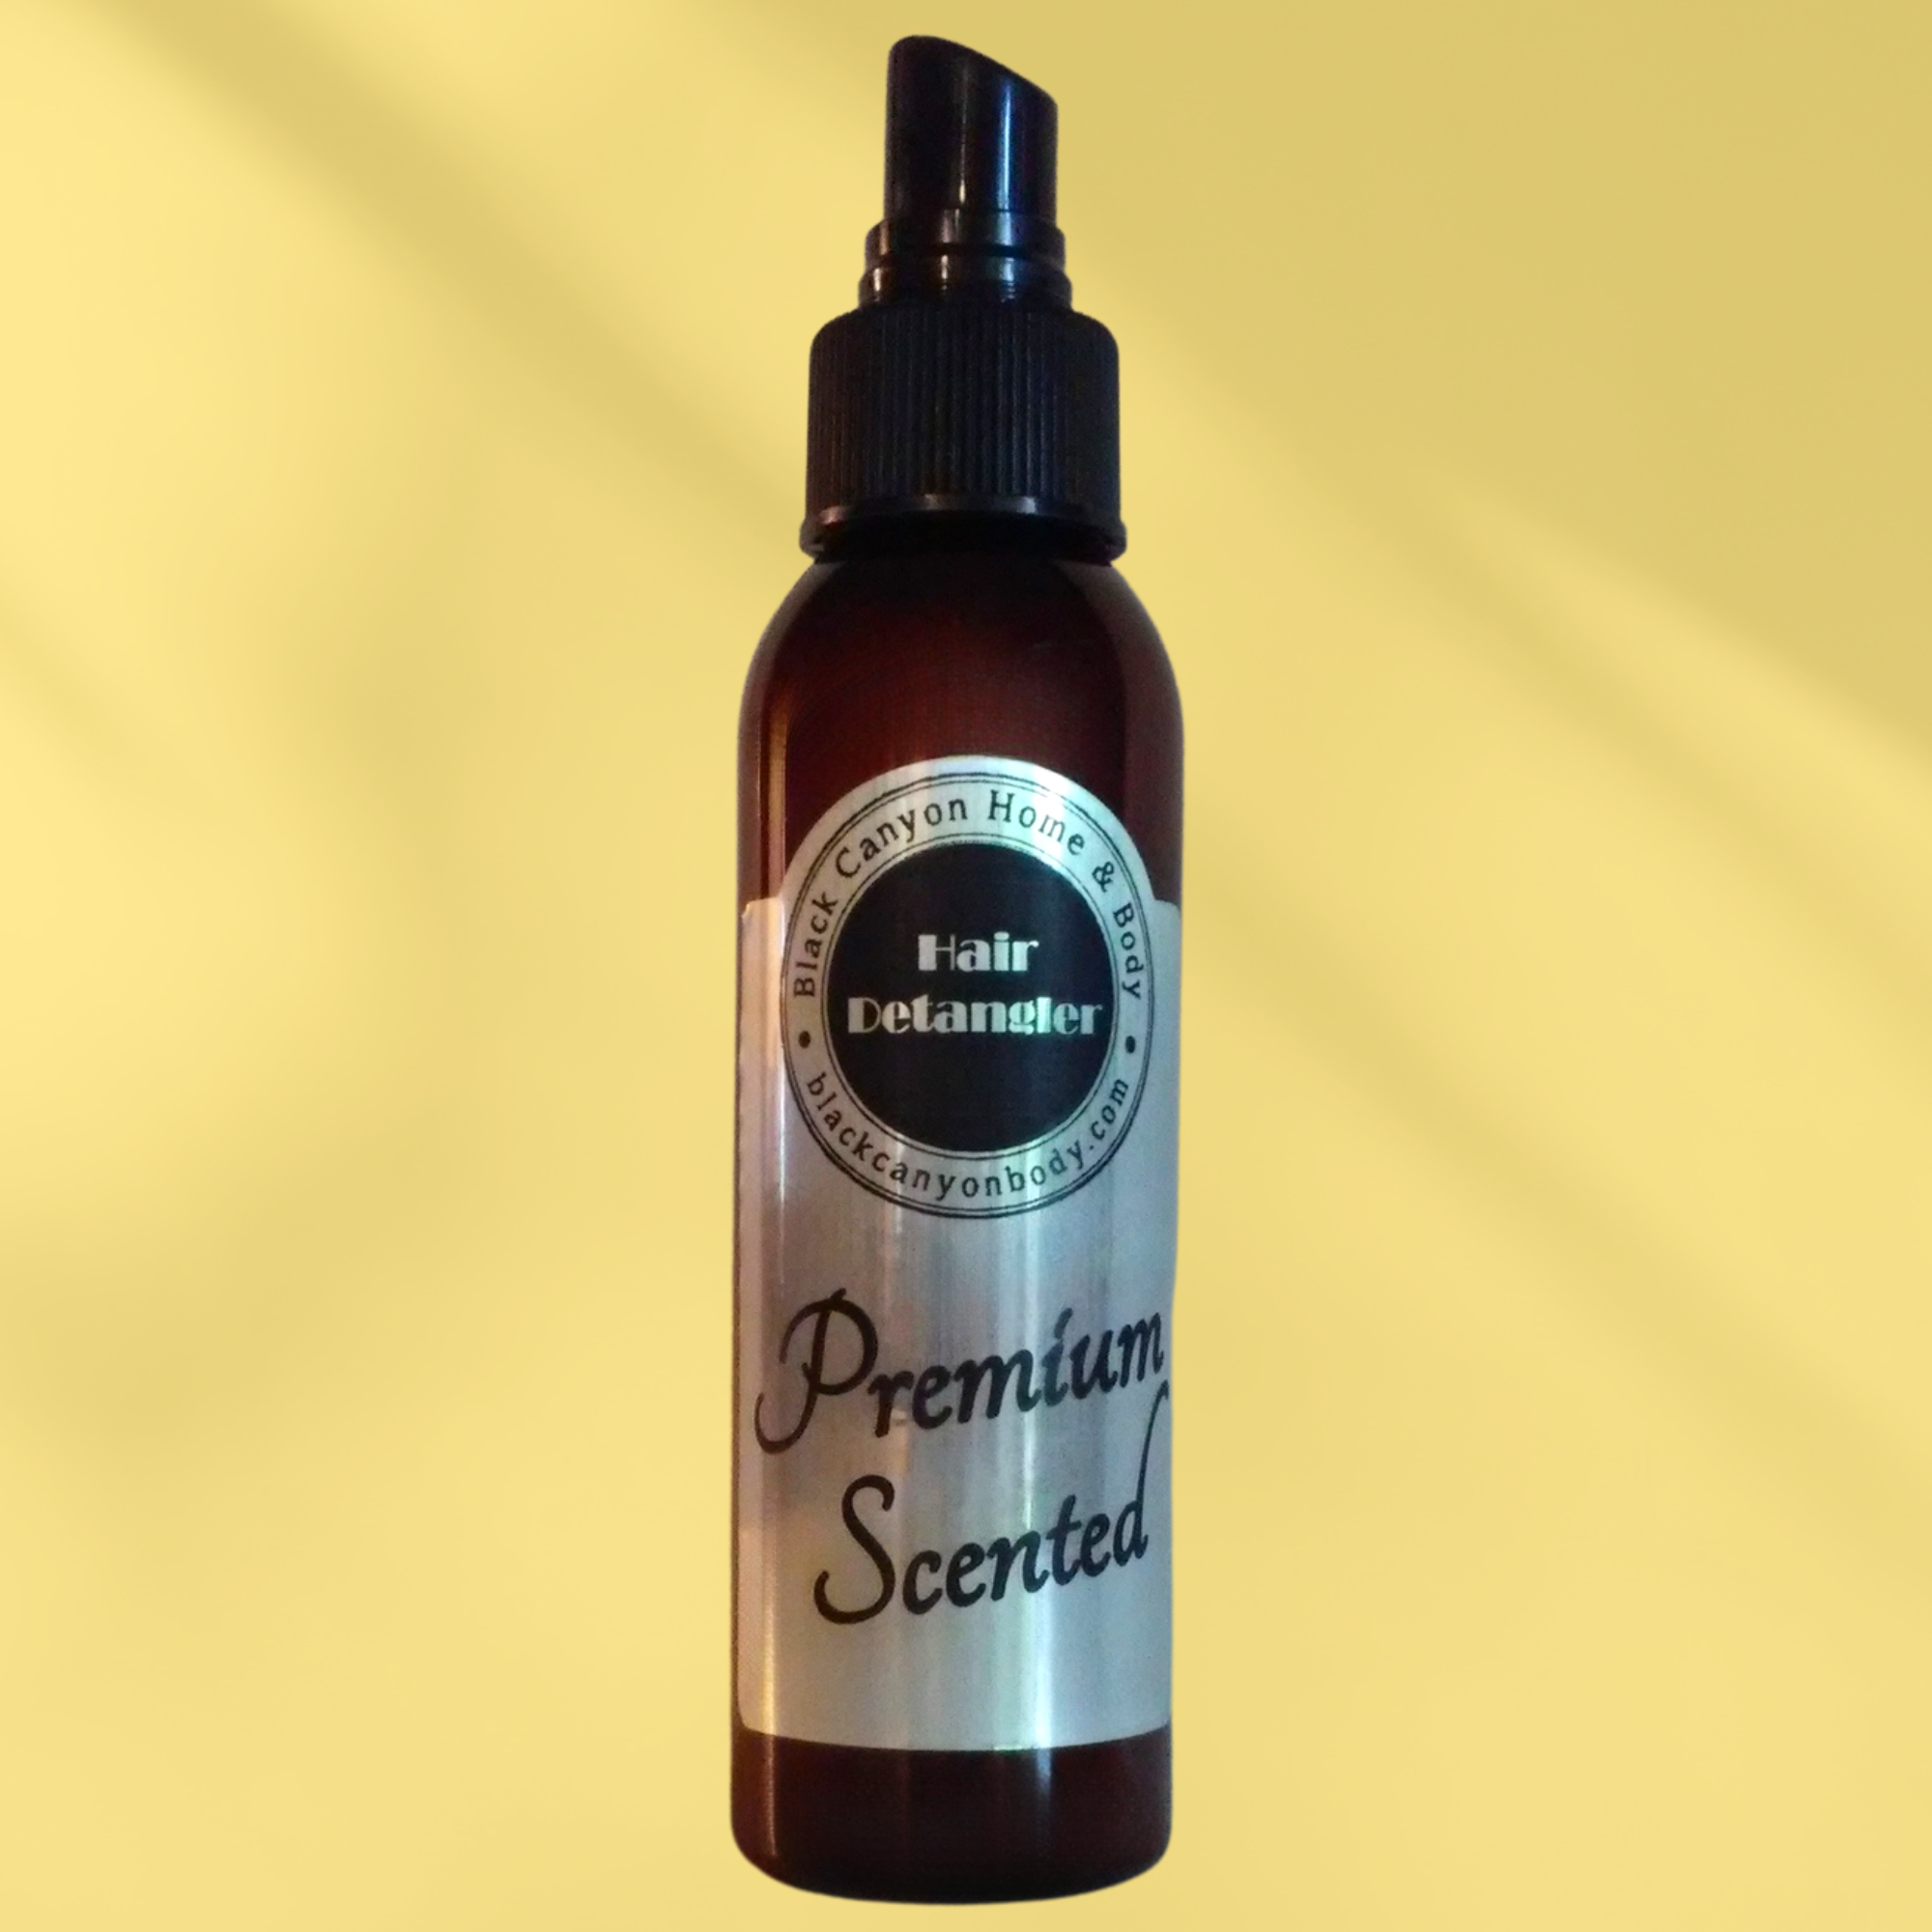 Black Canyon Vanilla Ginger & Brown Sugar Scented Hair Detangler Spray with Olive Oil